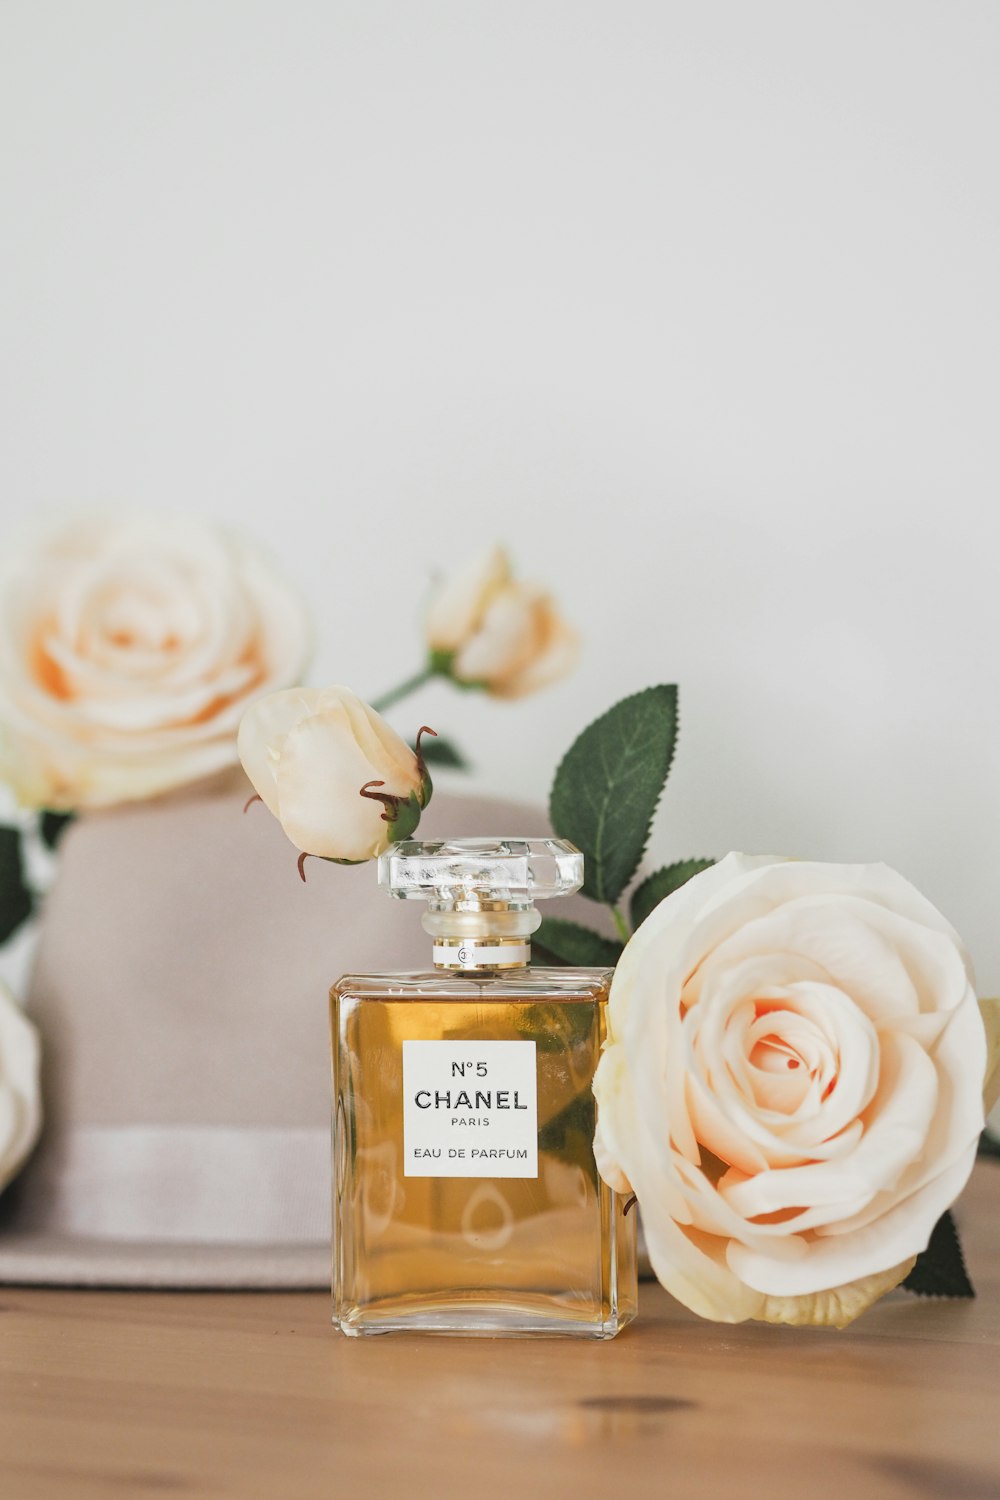 A bottle of chanel perfume sitting on a table next to flowers photo – Free  Perfume Image on Unsplash